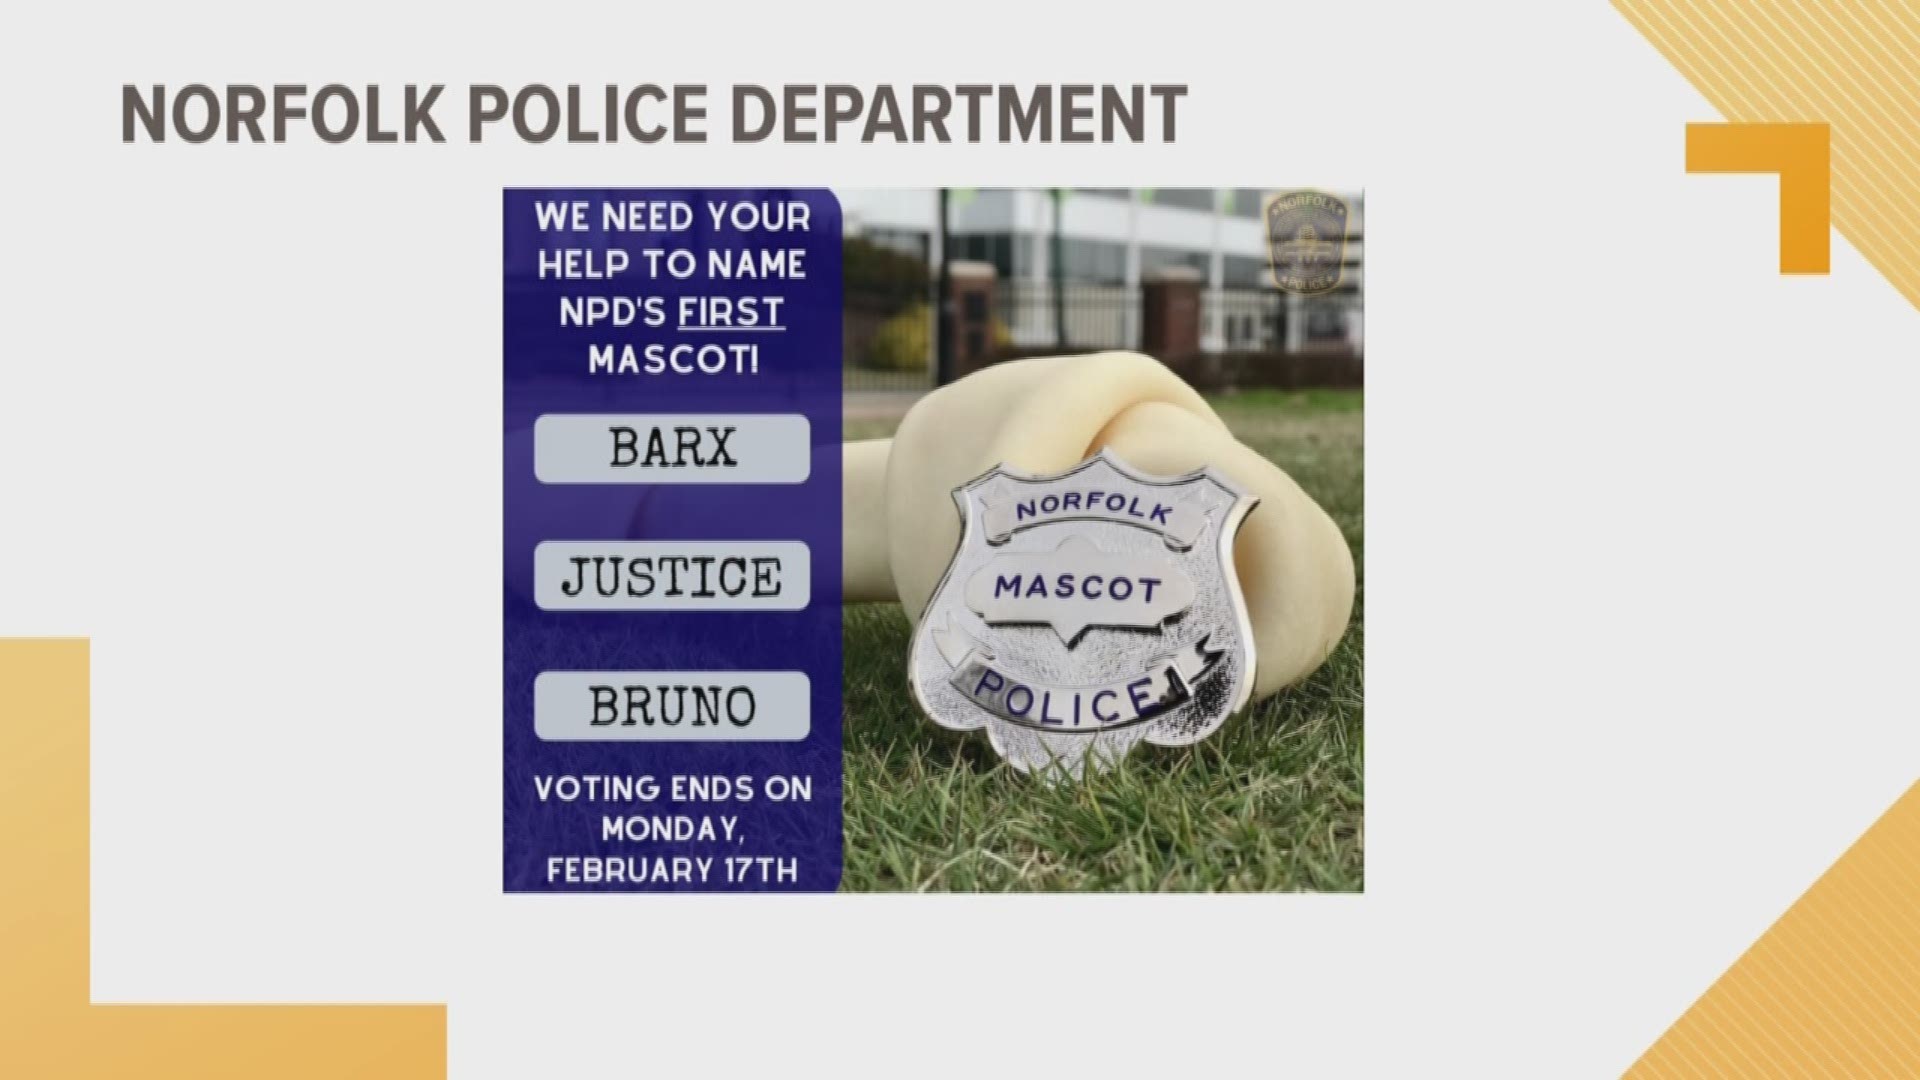 Norfolk Police Department has a new mascot. They need help naming it.